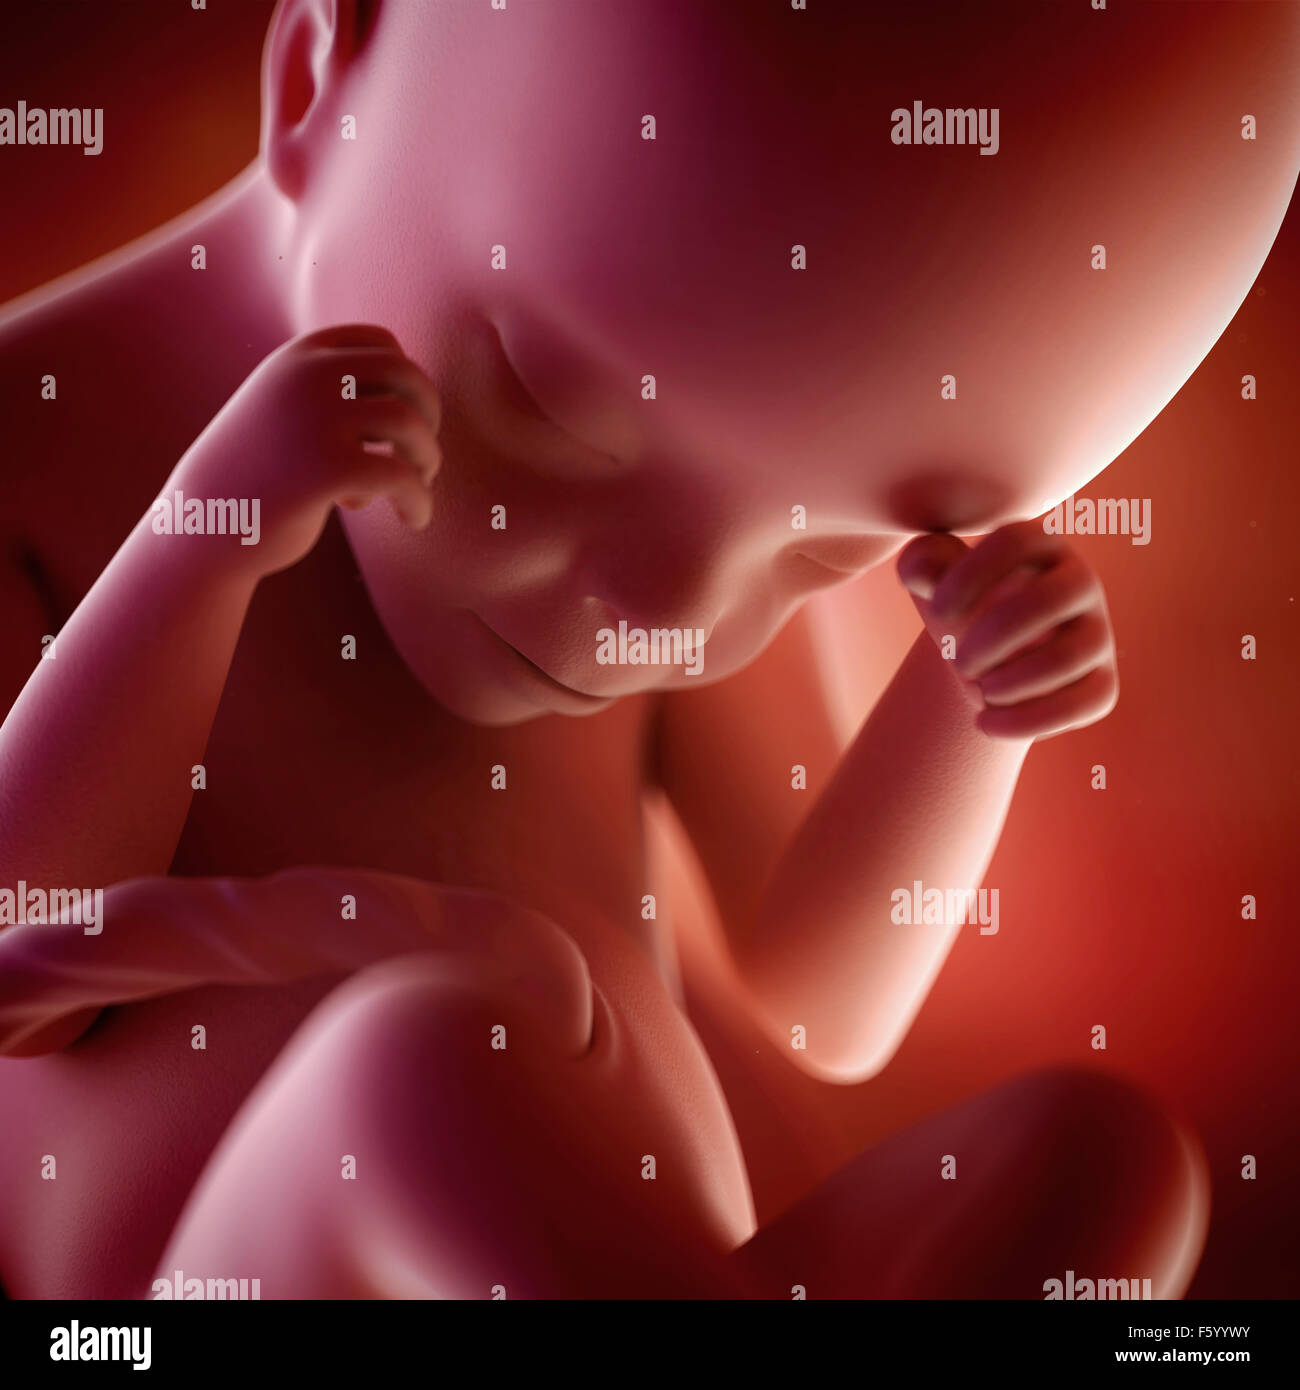 medical accurate 3d illustration of a fetus week 24 Stock Photo